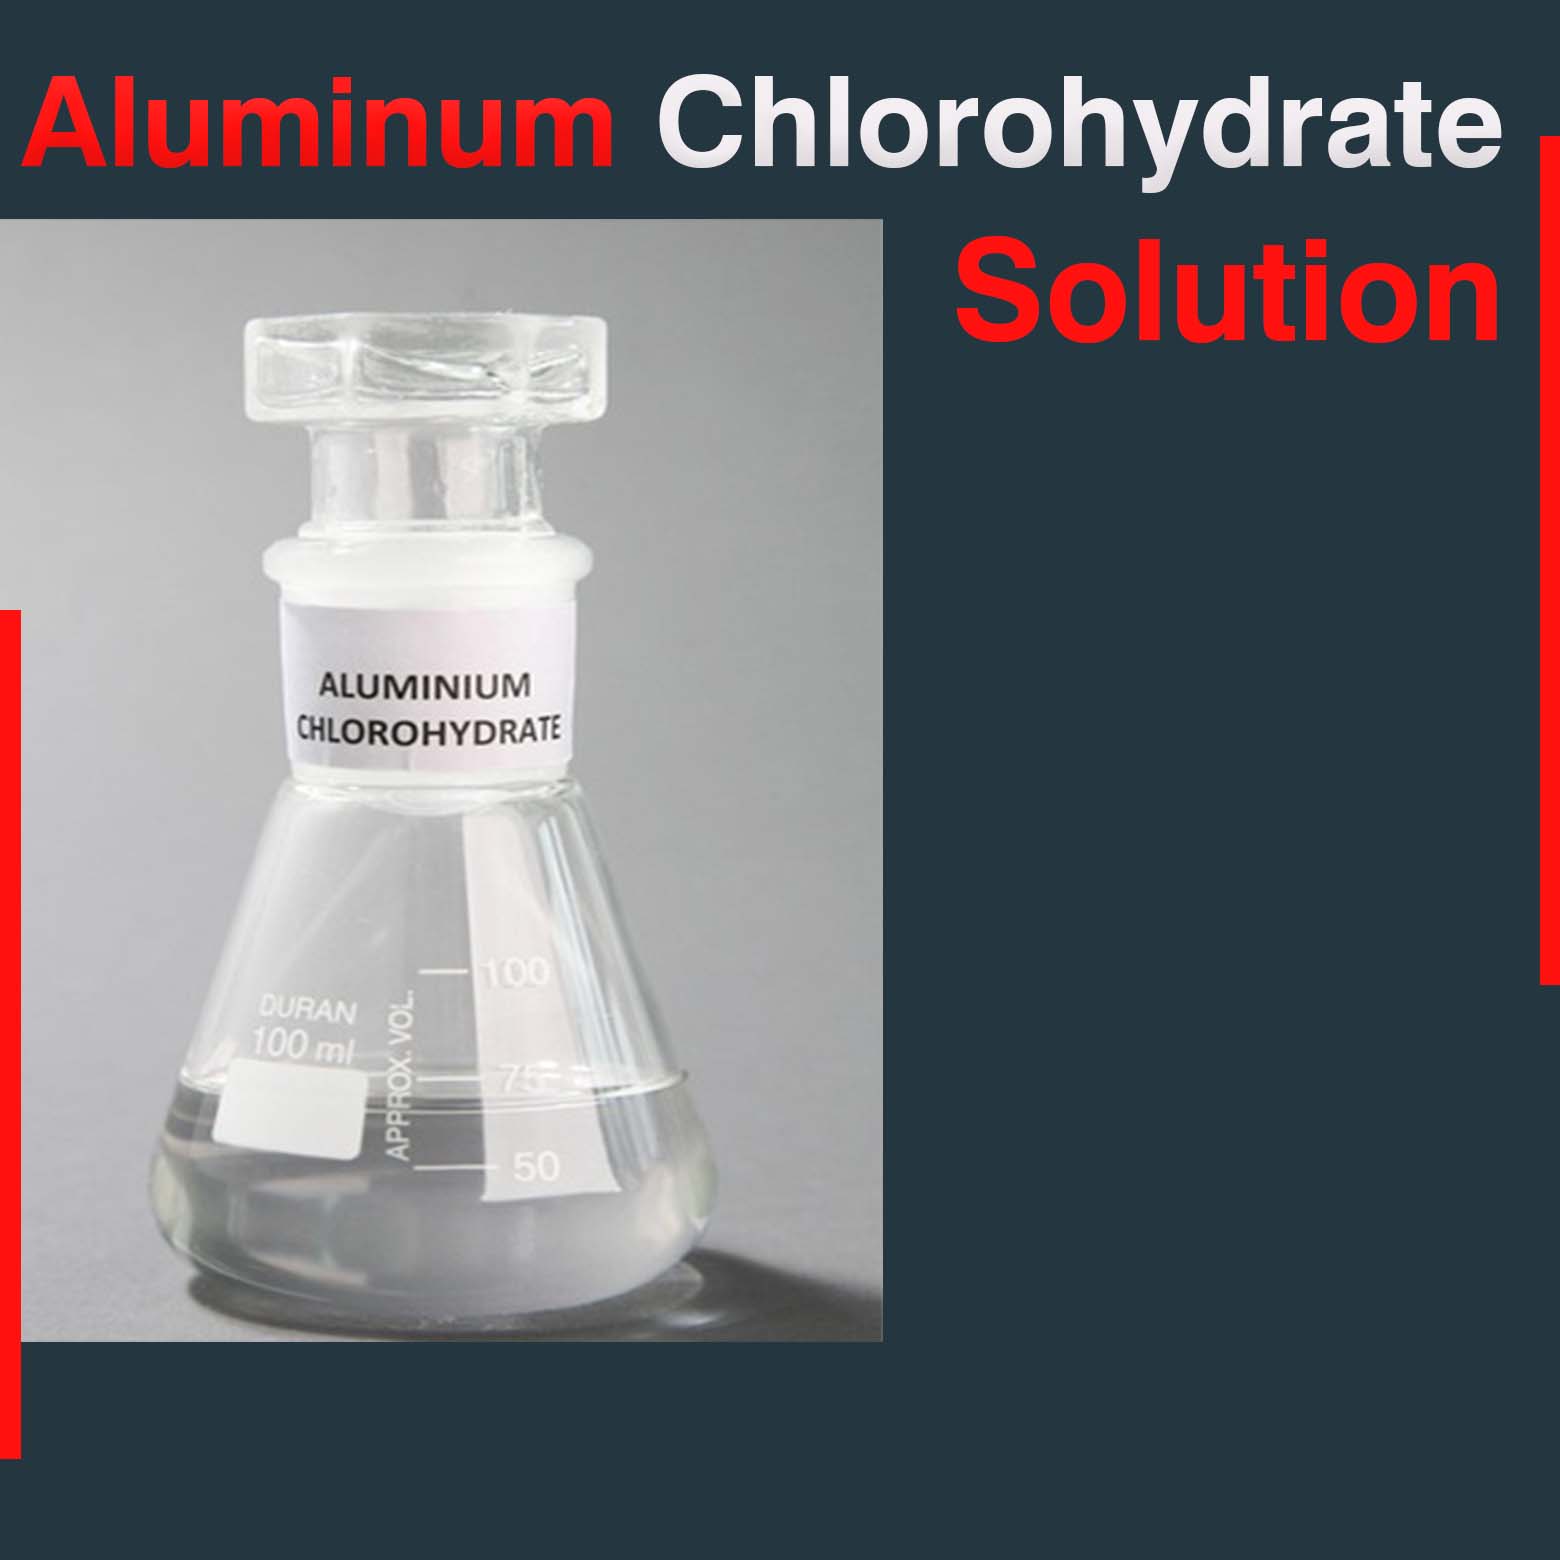 Aluminum Chlorohydrate Solution In 